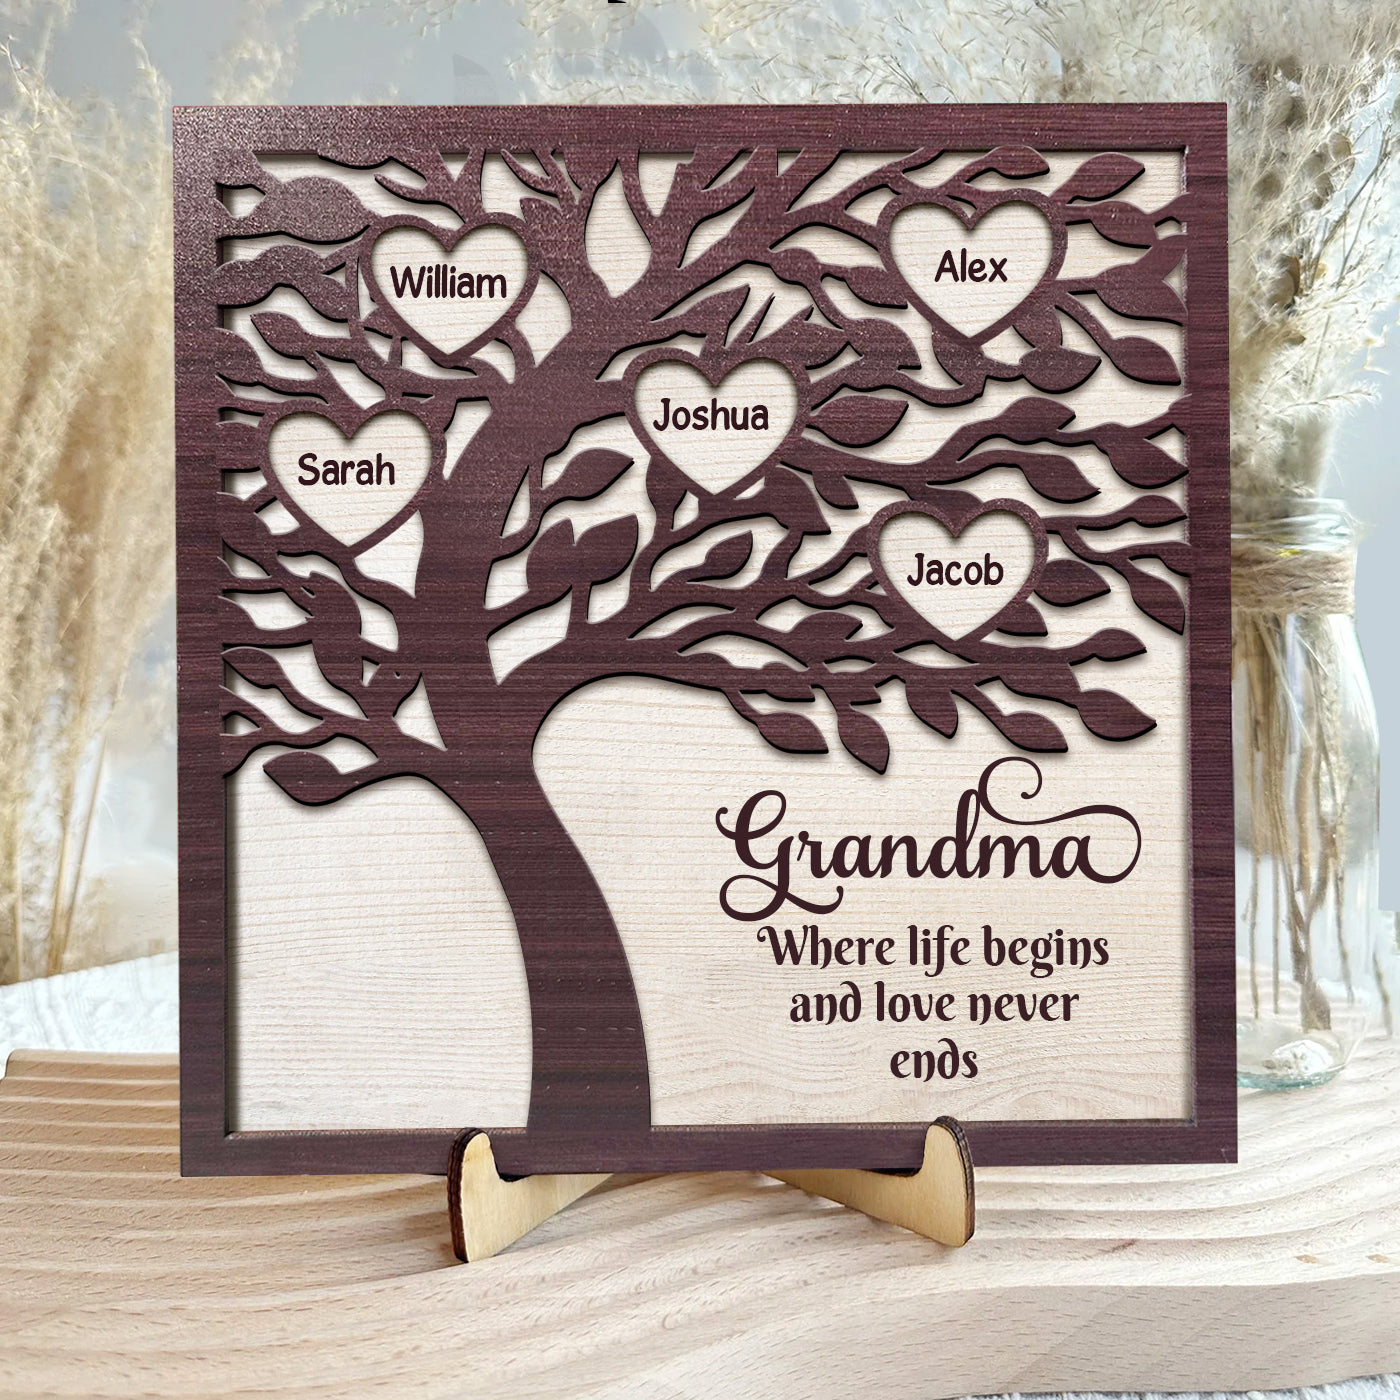 Grandma Where Life Begins and Love never Ends Personalized Plaque CTL08JAN24CT4